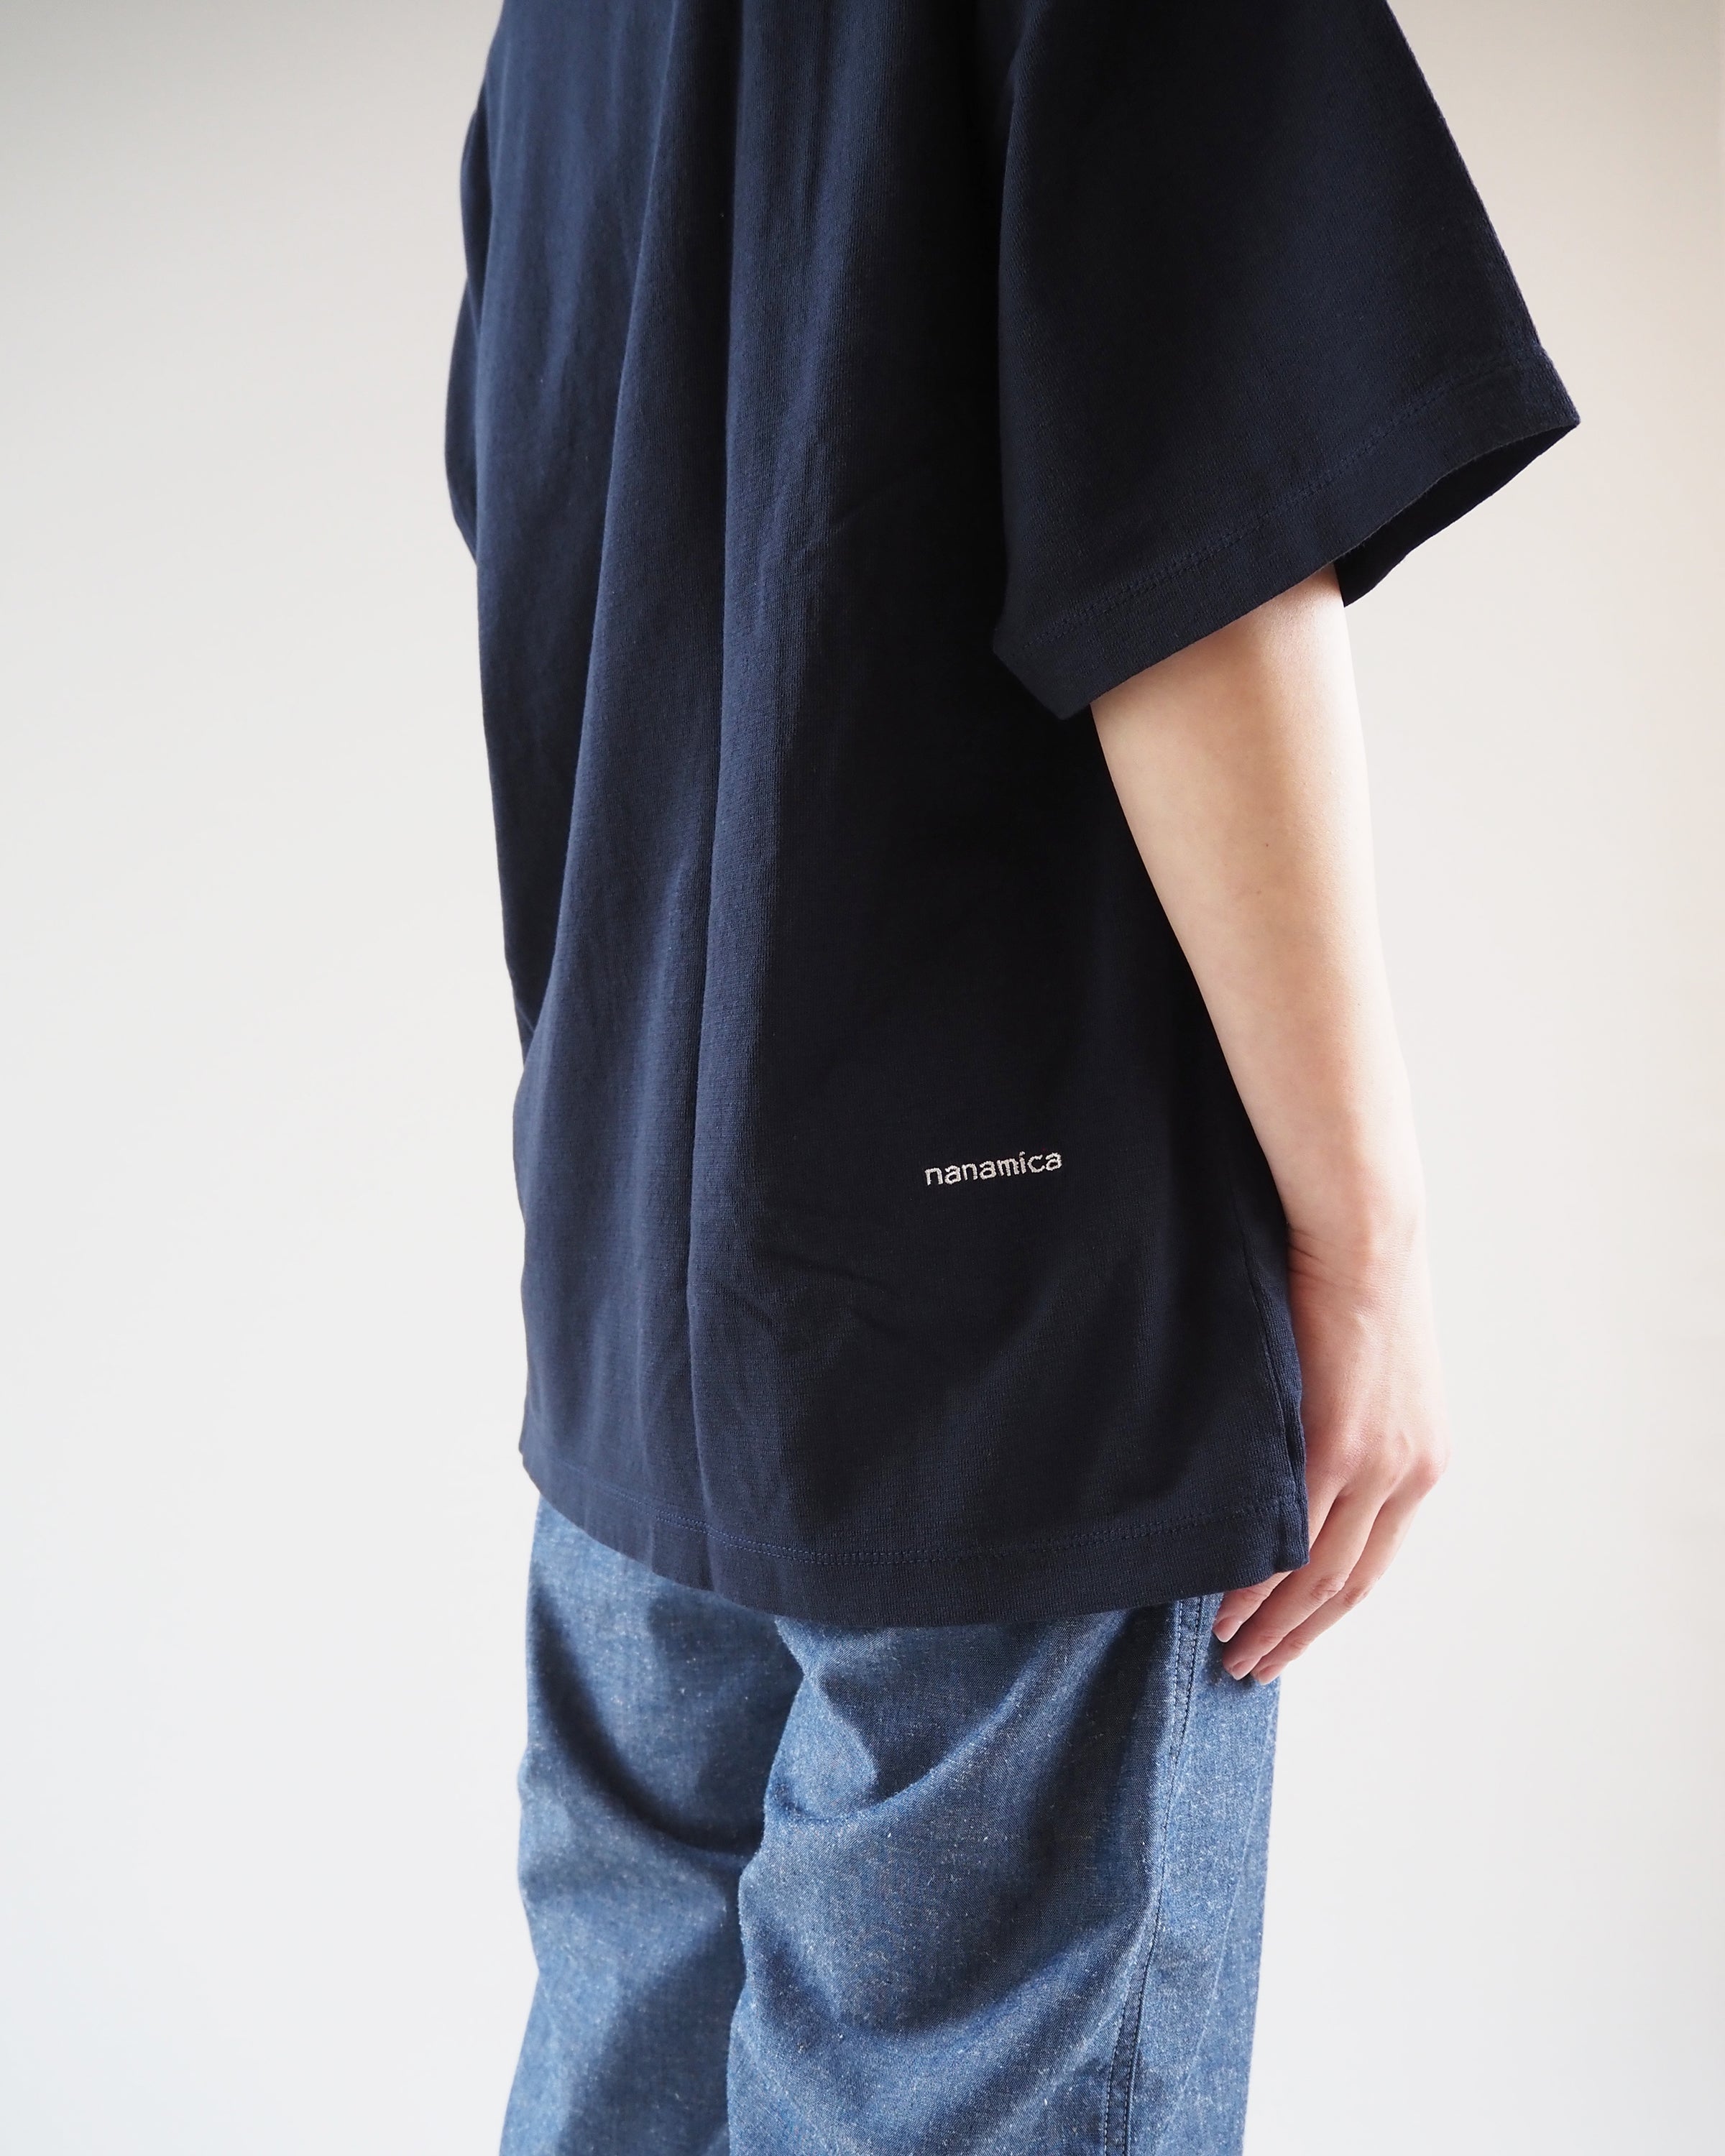 All Oversize Tees, Navy